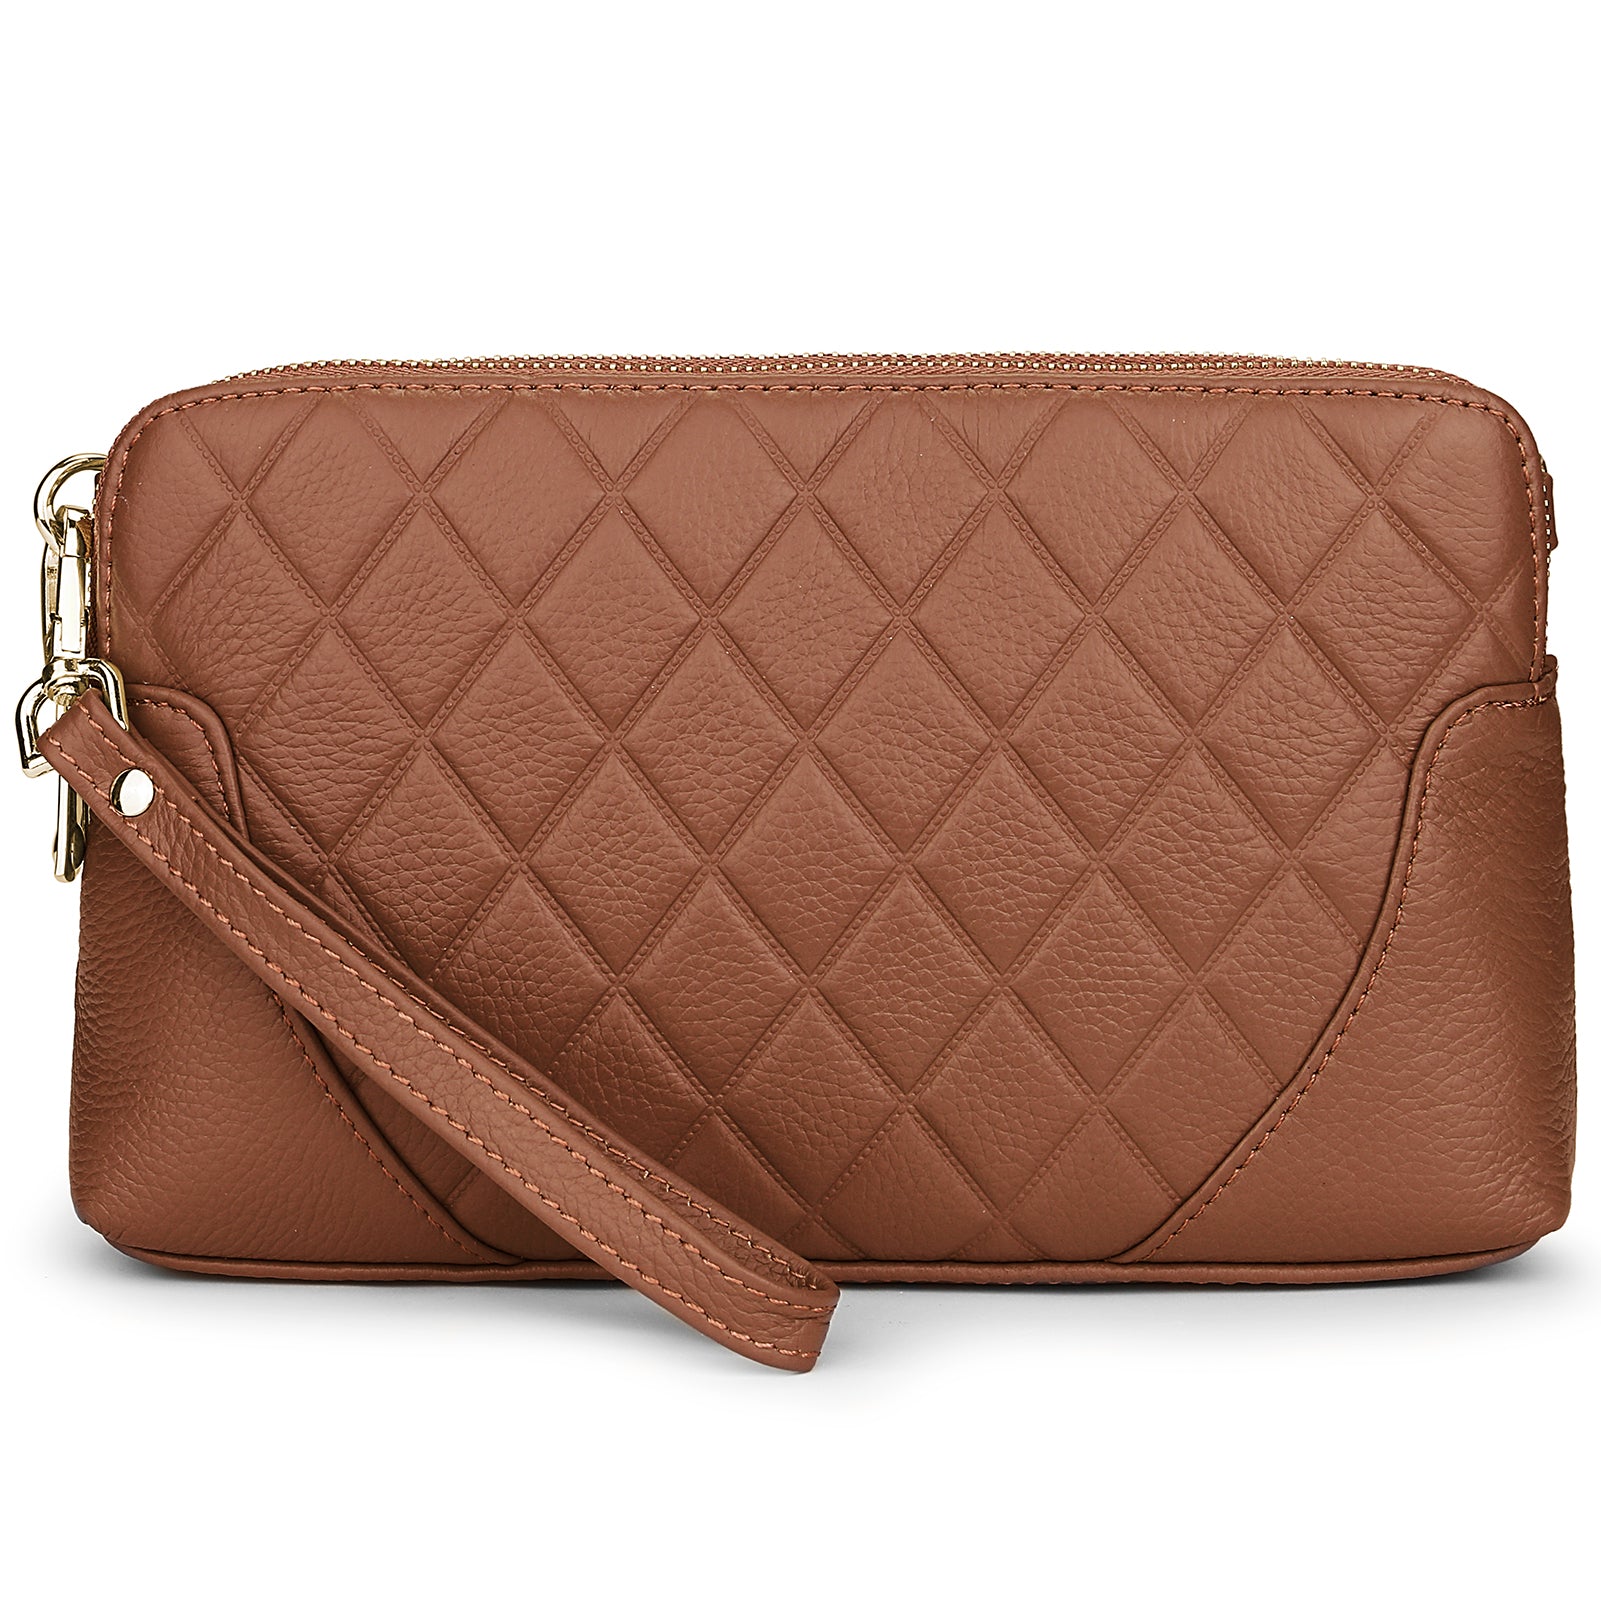  Women Quilted Crossbody Bag Genuine Leather Clutch